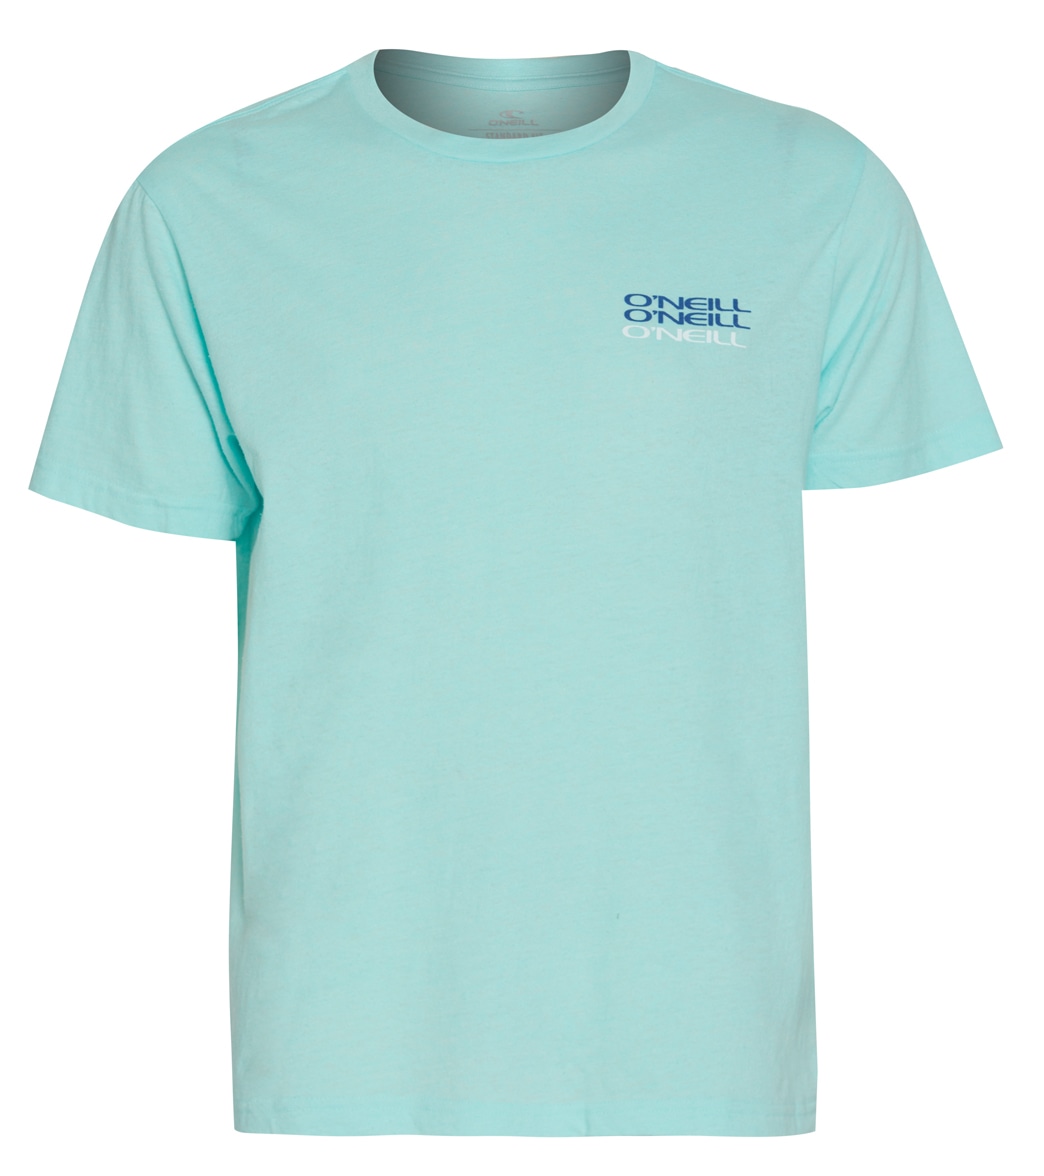 O'neill Men's Circle Surfer Tee Shirt - Turq Heather Large Cotton/Polyester - Swimoutlet.com